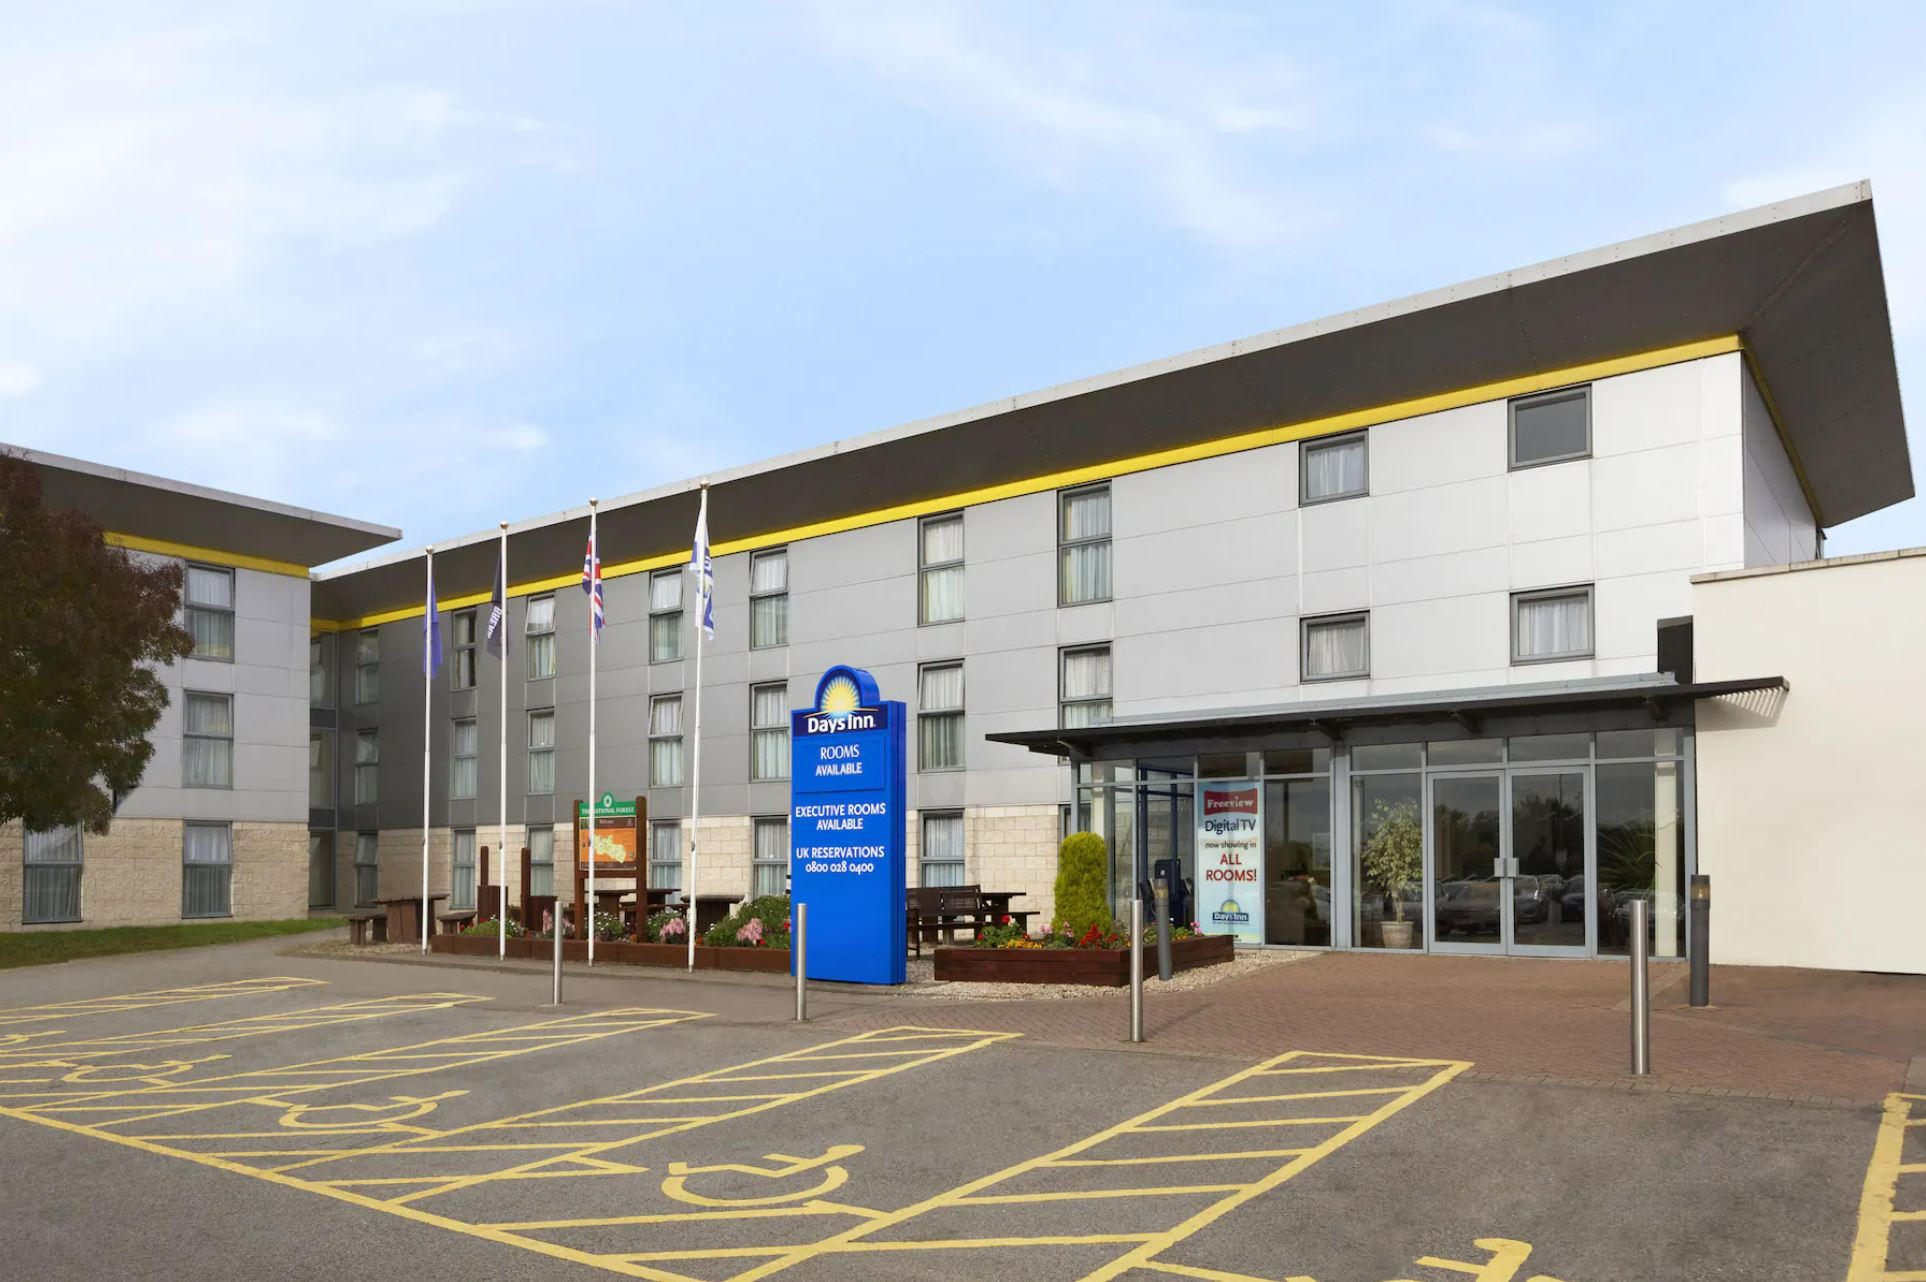 Days Inn Leicester Forest East M1 - Leicester, Leicestershire LE3 3GB - 01162 390534 | ShowMeLocal.com